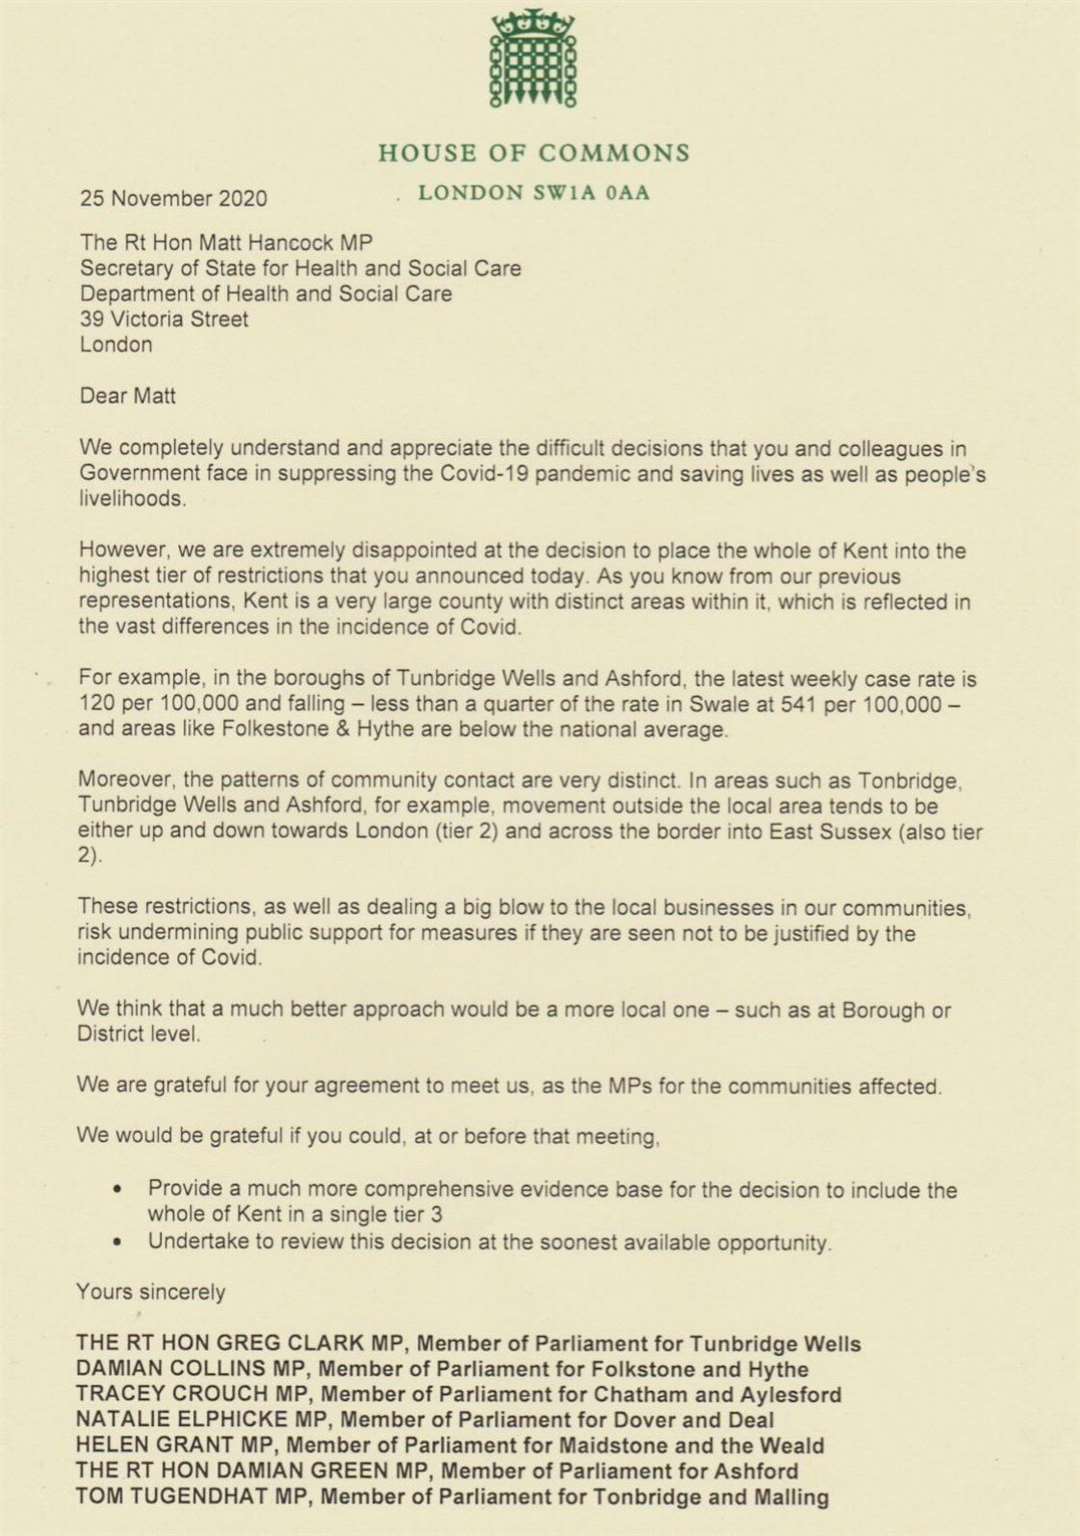 The letter sent by the MPs to Mr Hancock